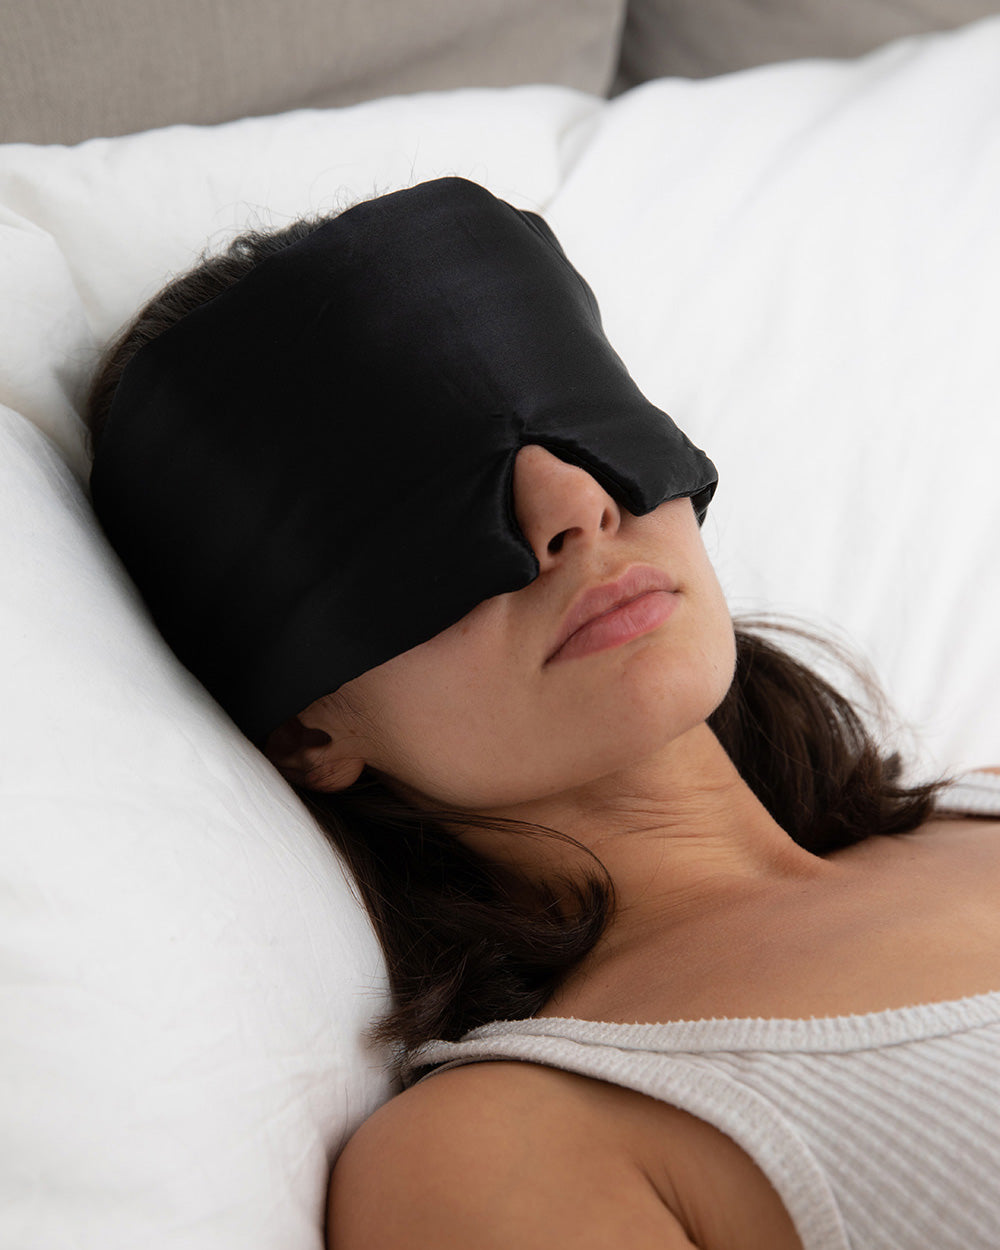 Blackout Sleeping Eye Mask - Comfort Stitched from Top Corner - New  Innovative Design - Straps Angle Down 20 ℃ to Avoid Ears - Cool Mesh -  Soft-Silk